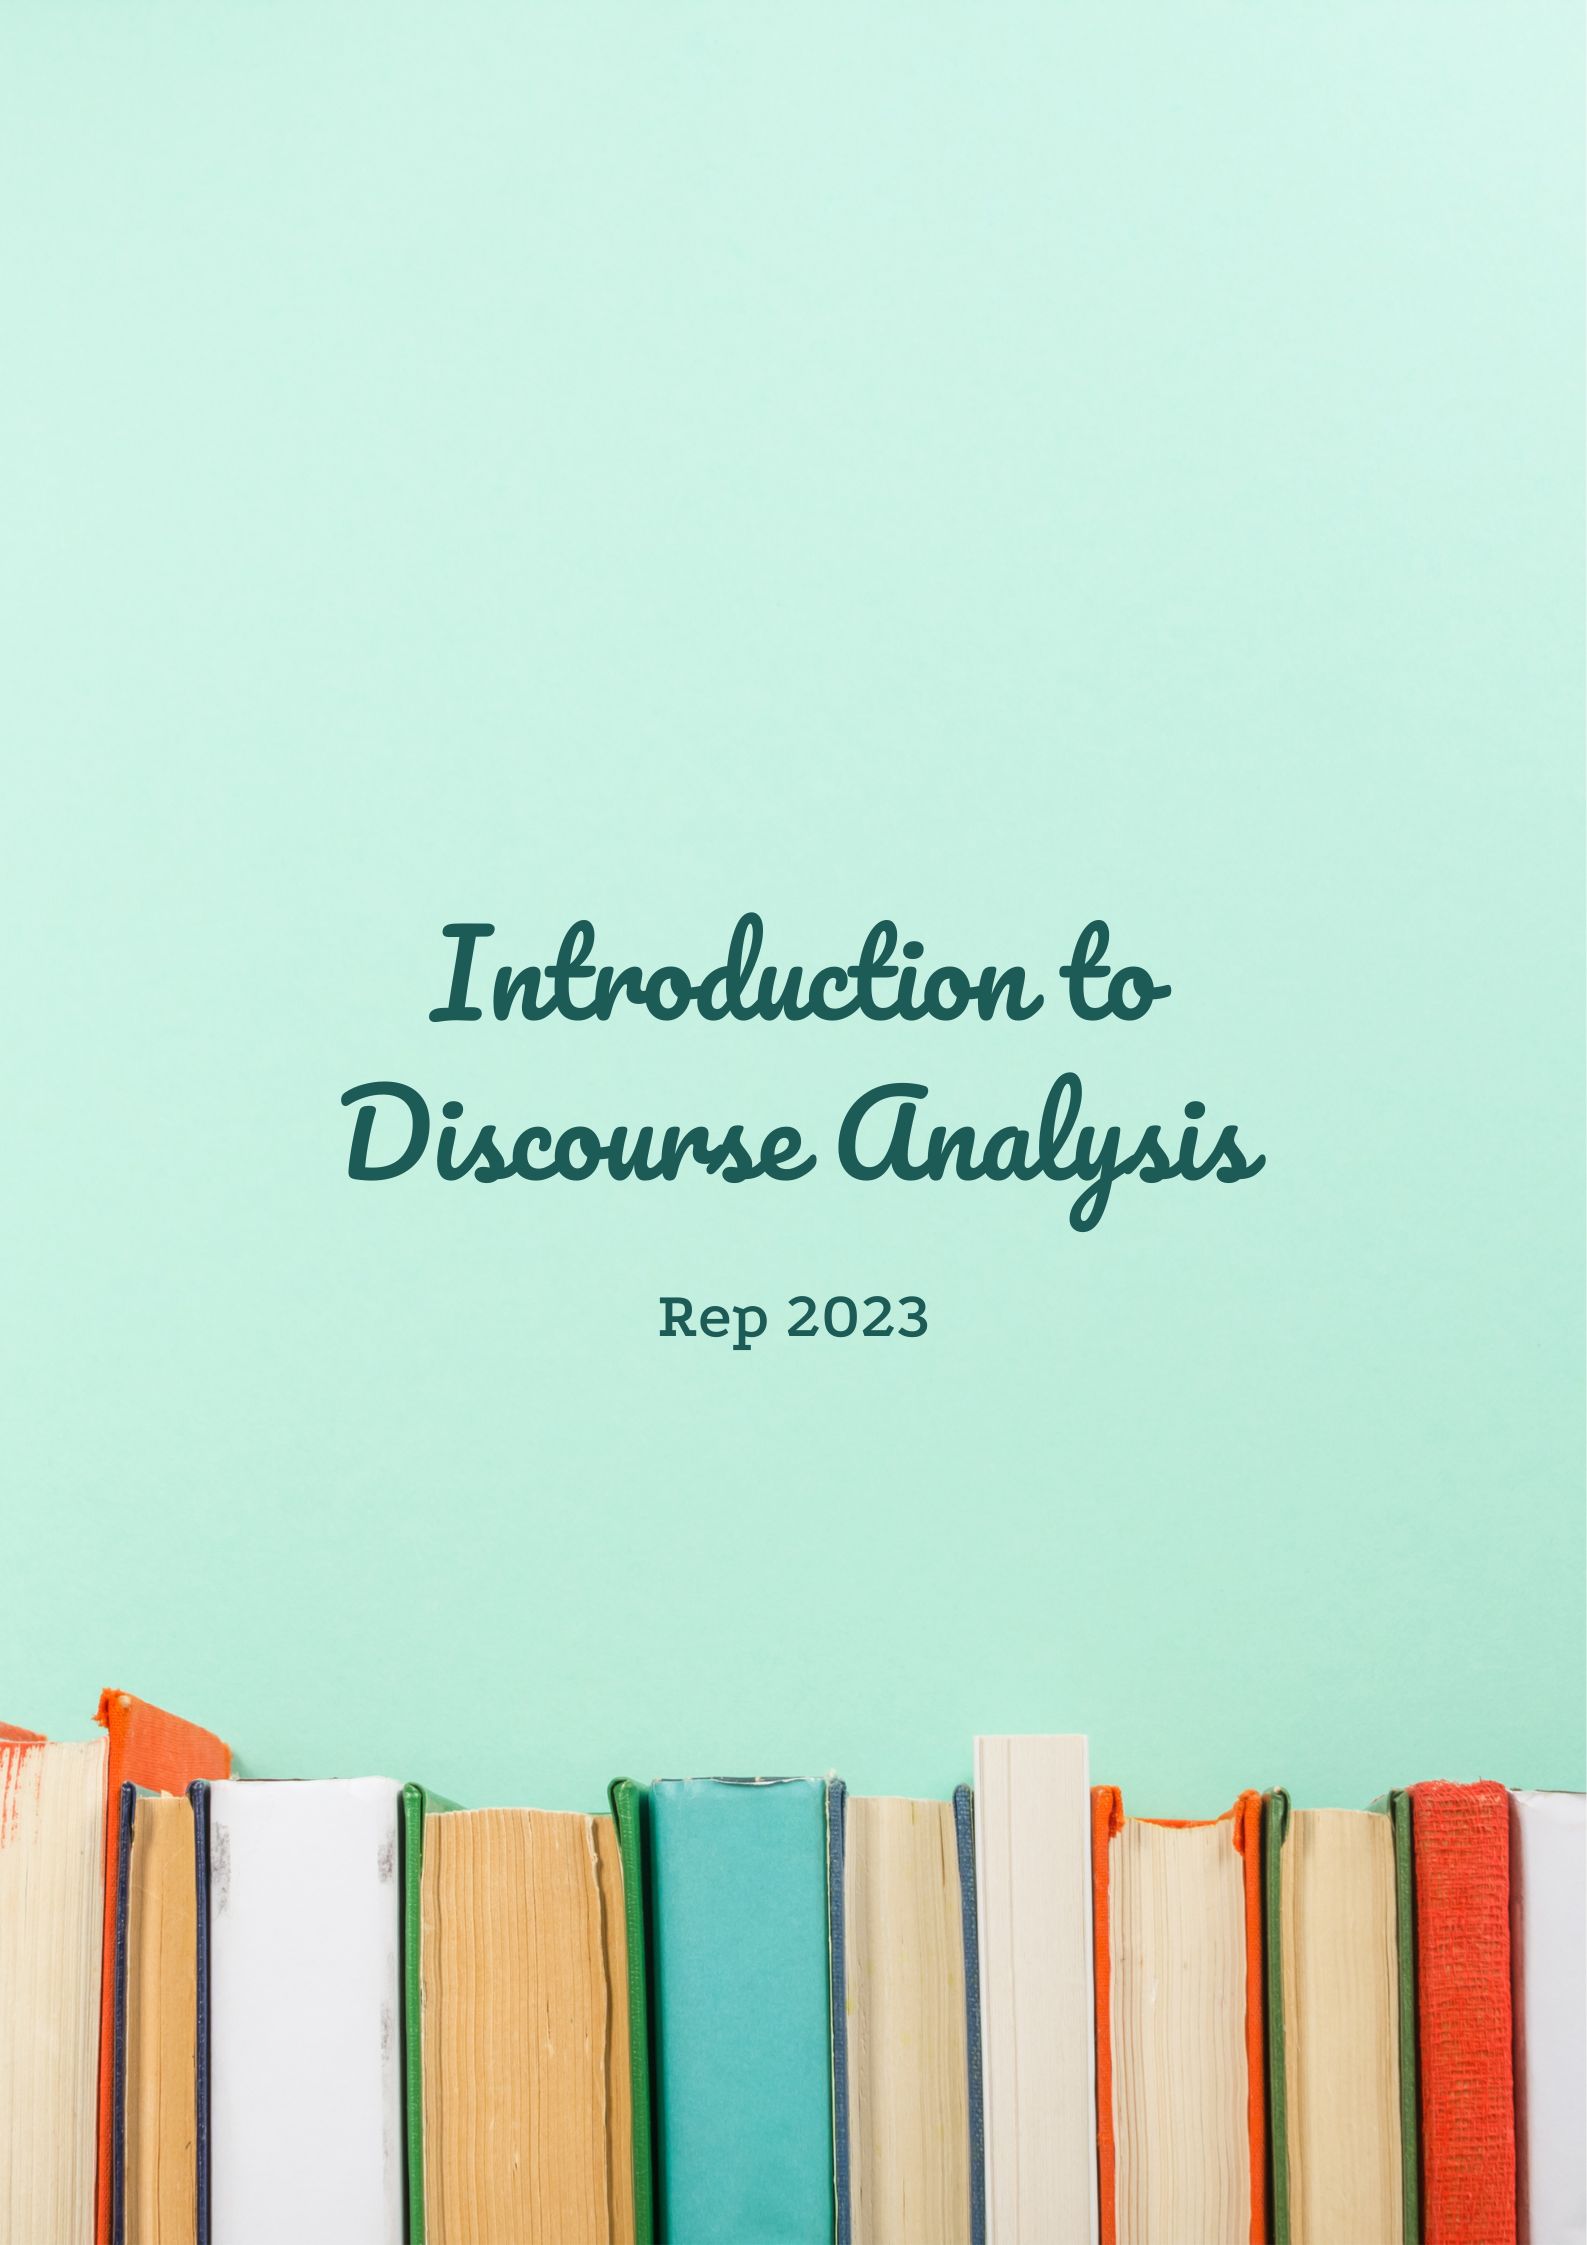 Introduction to Discourse Analysis_Rep